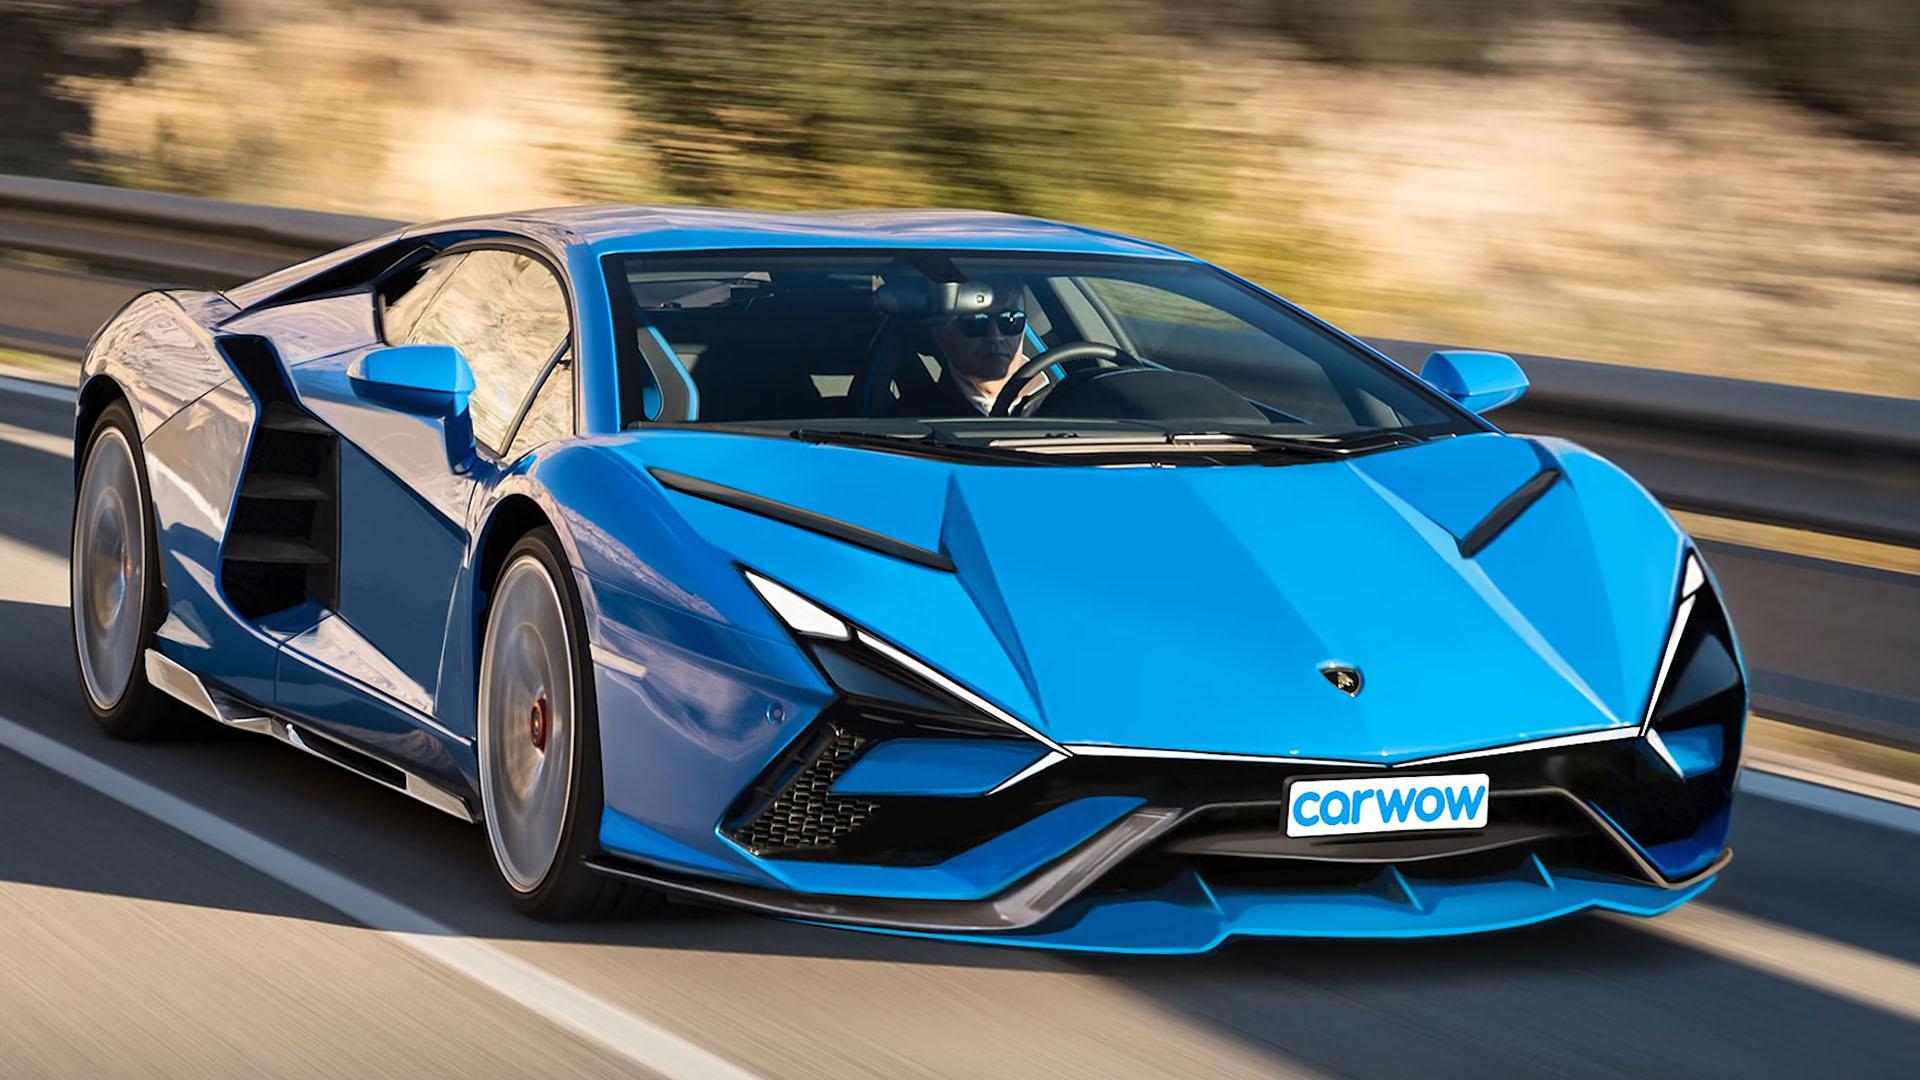 Carwow shows new front and rear renders of the Aventador successor -  LamboCARS